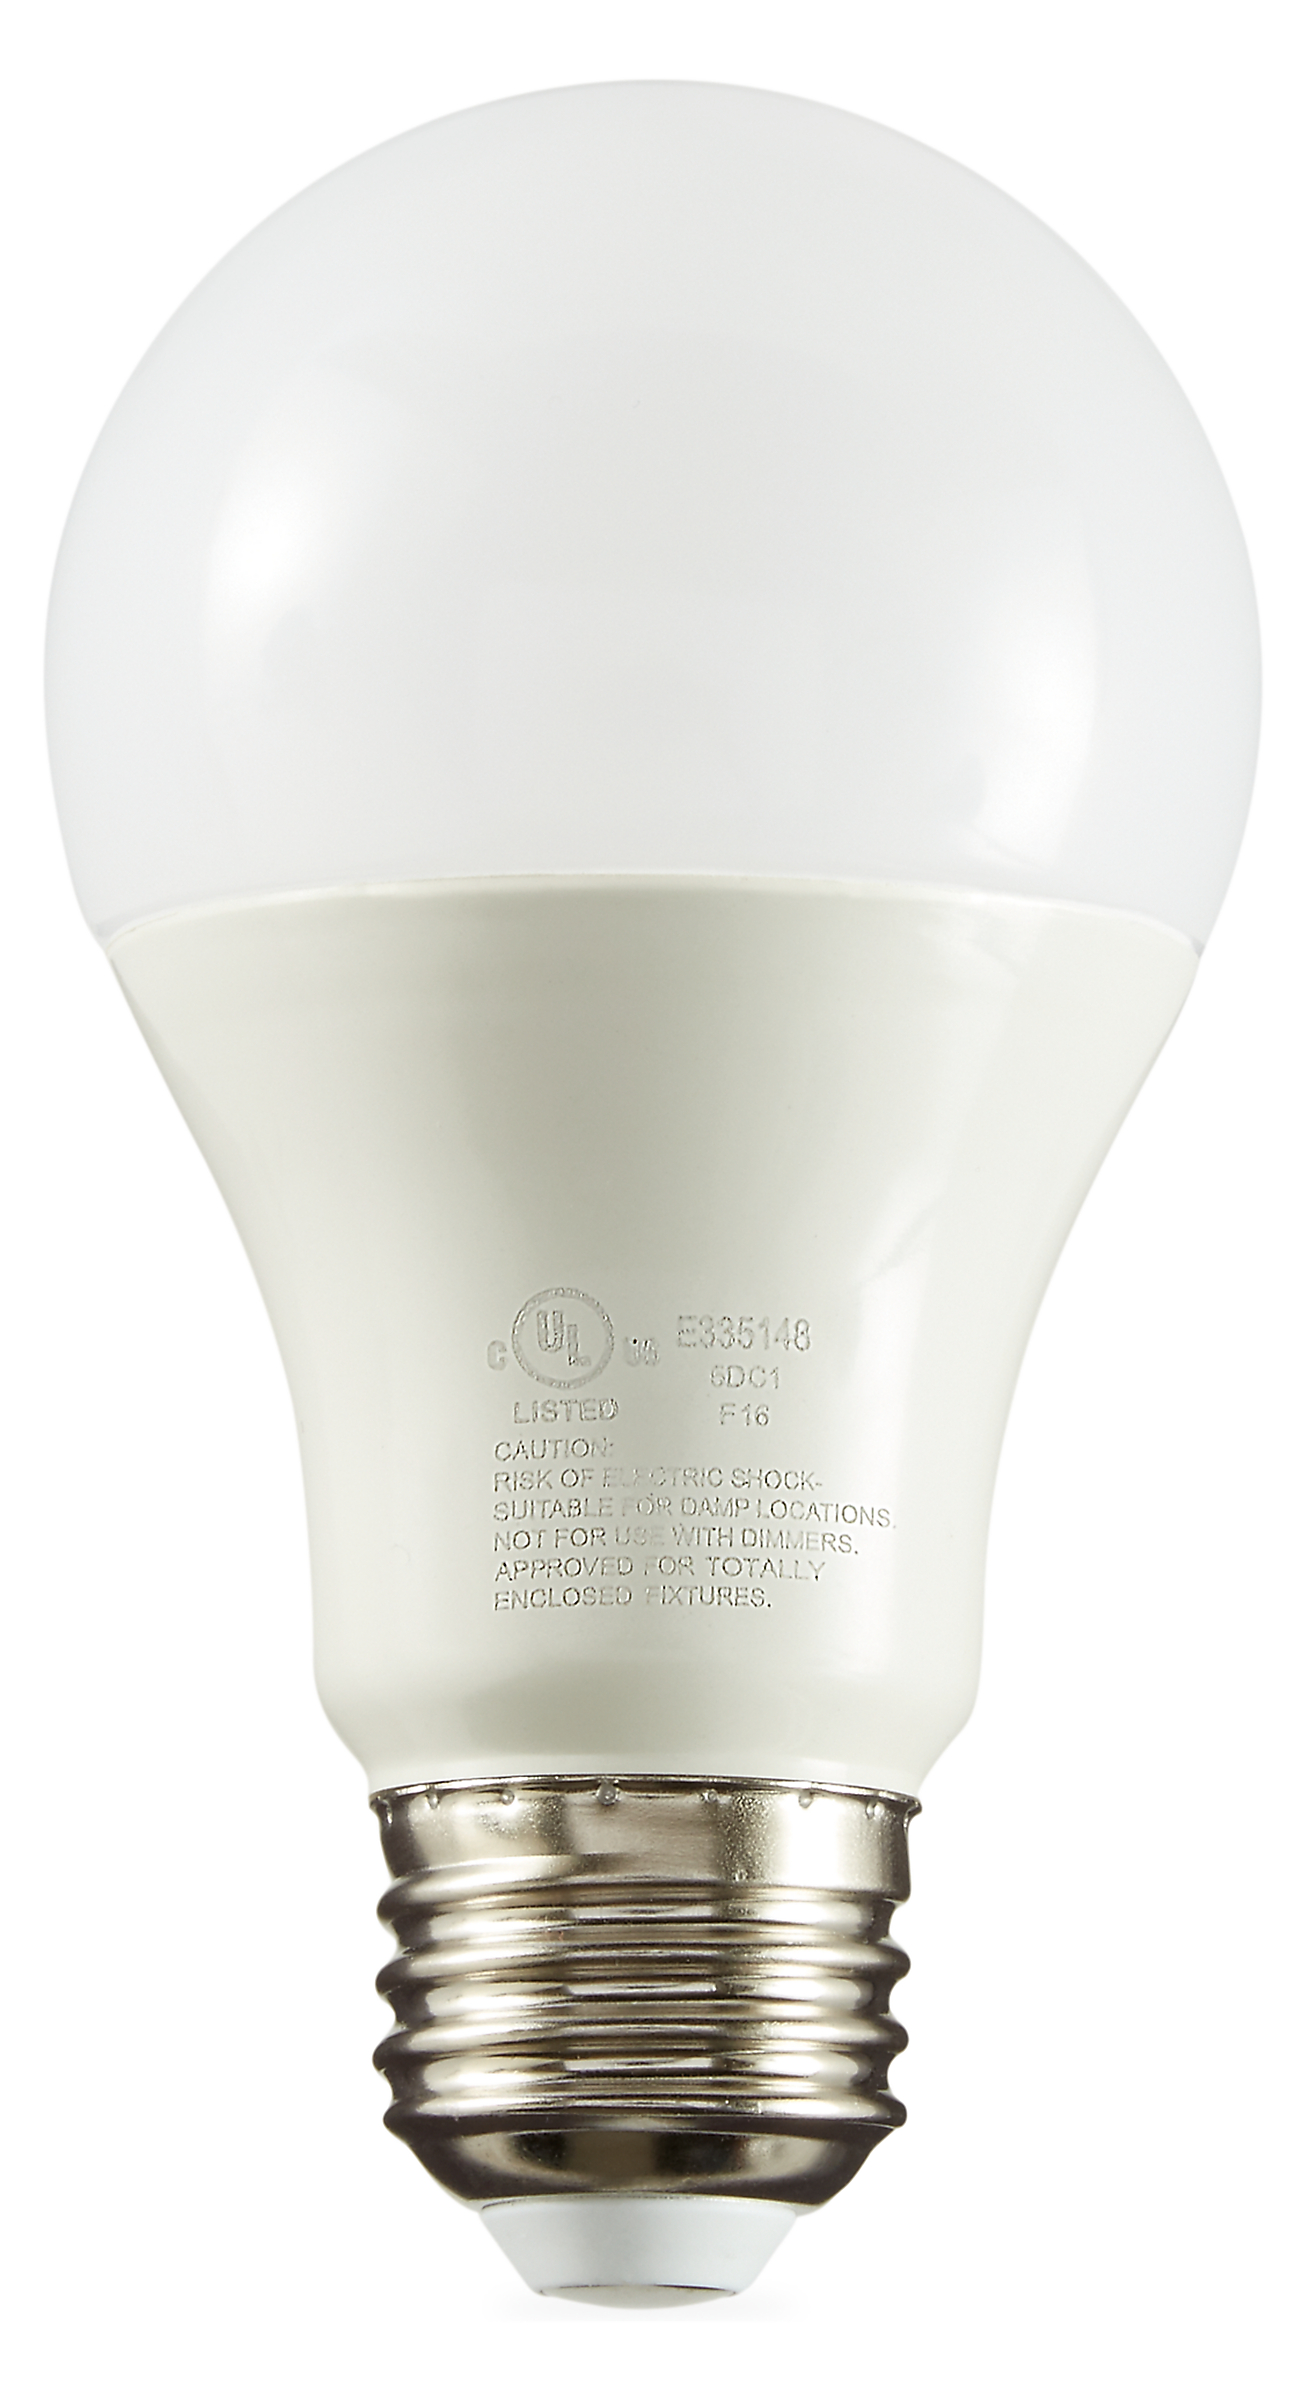 LED Non-Dimmable Light Bulbs, 60w Comparable - 4 Pack